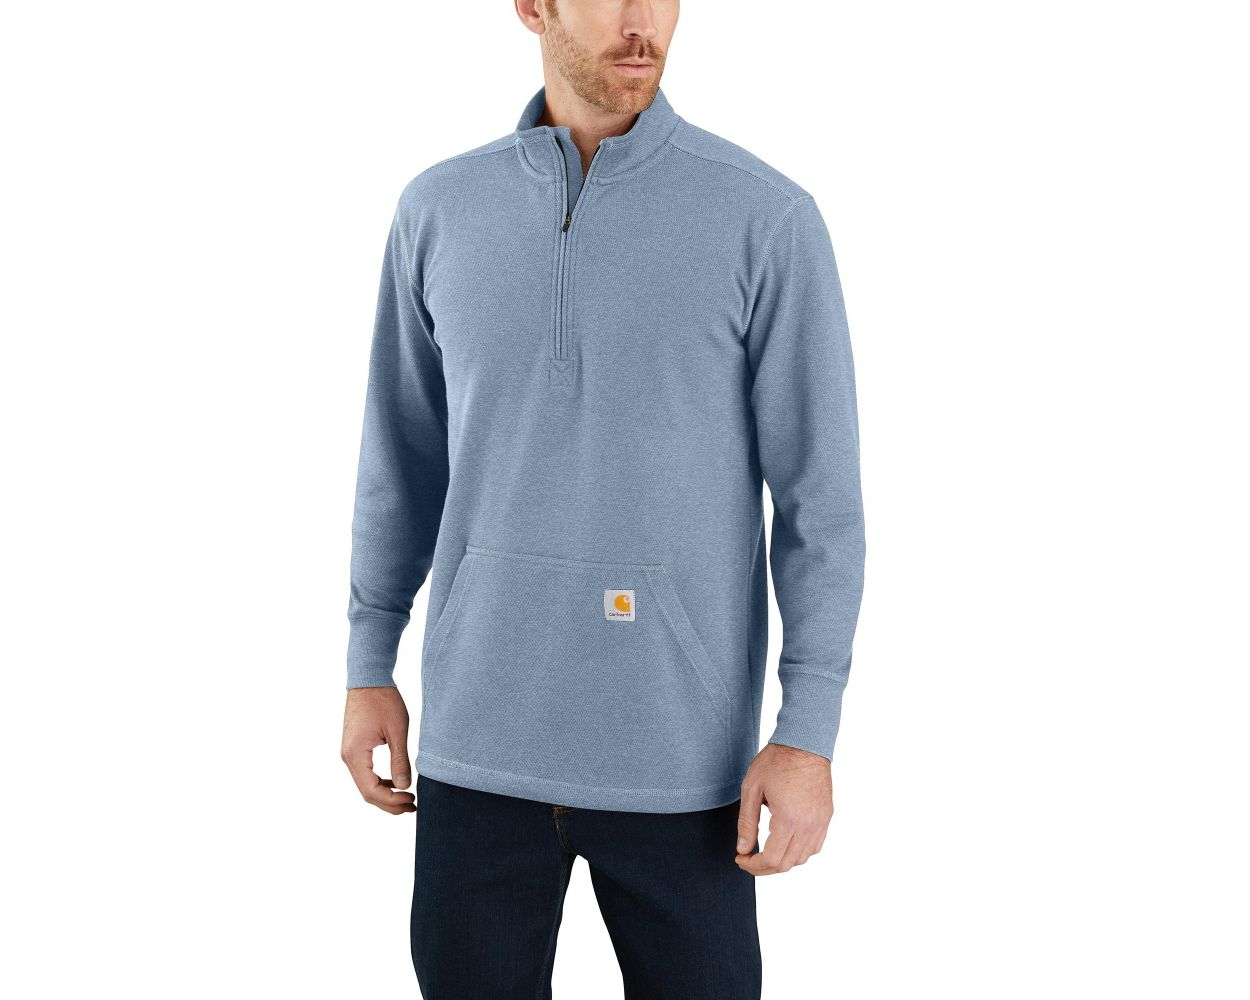 Carhartt Men's Underwear and Thermals - Traditions Clothing & Gift Shop